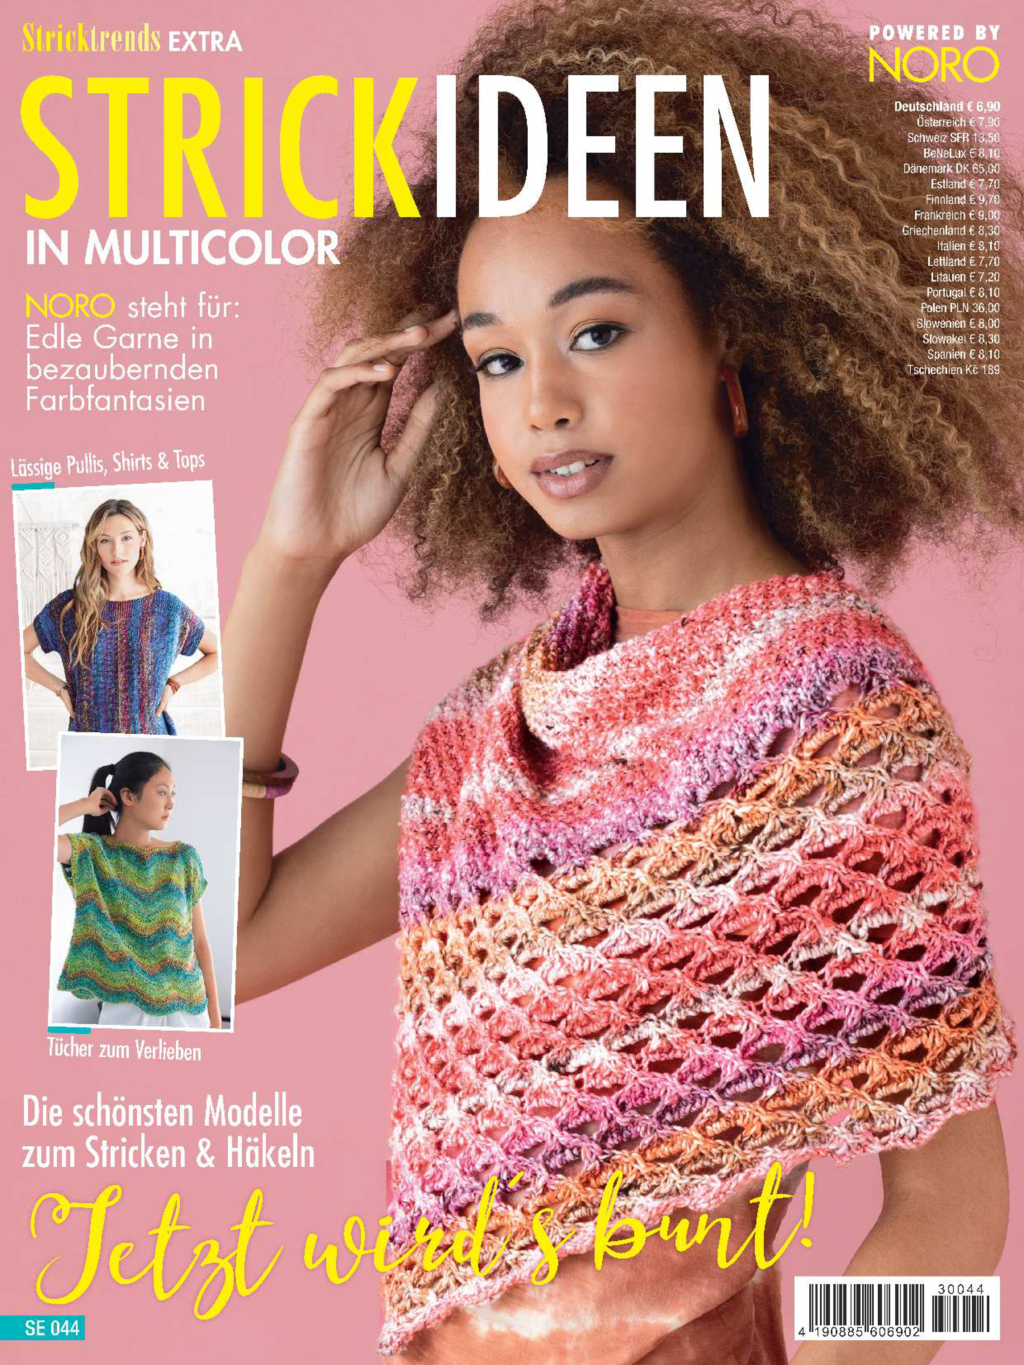 E-Paper: Stricktrends Extra SE044 - Strickideen in Multicolor